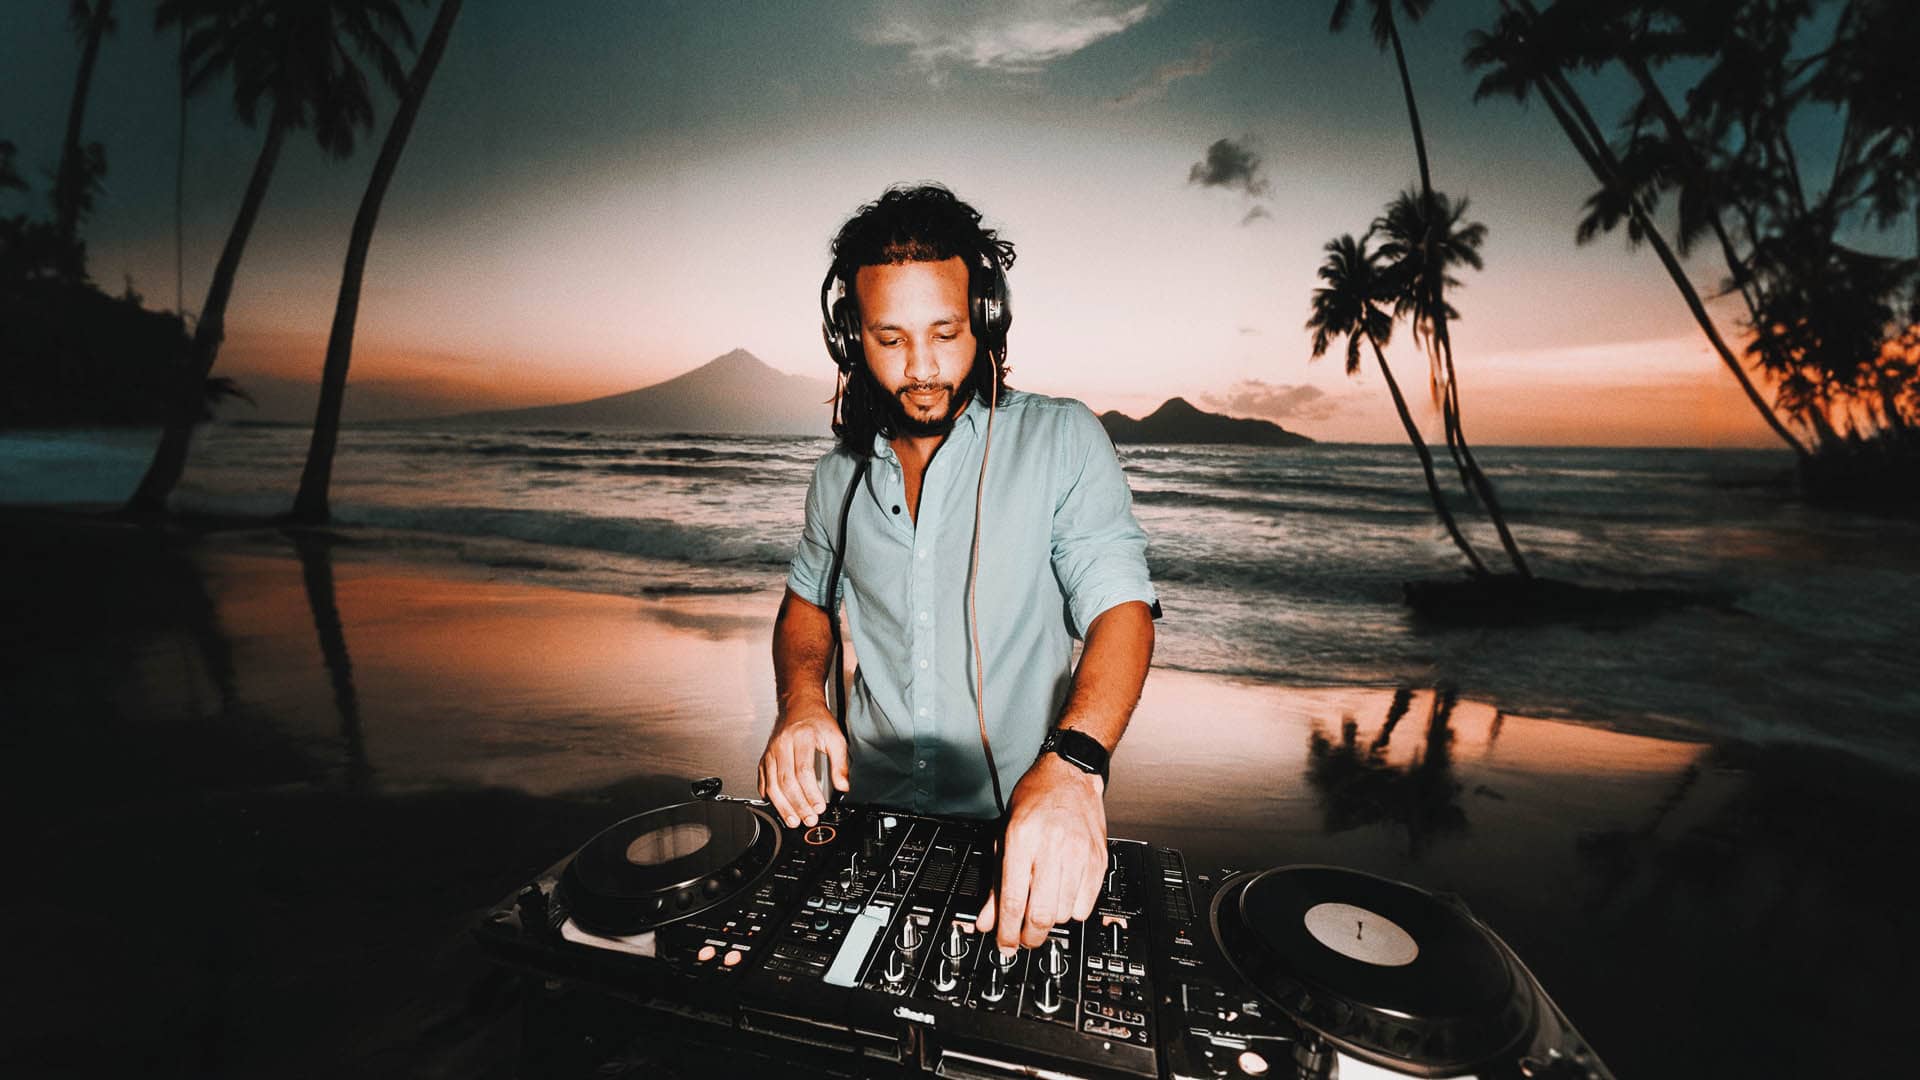 Rodney Hazard DJing at the beach with latest hit 'Love Me Back'.